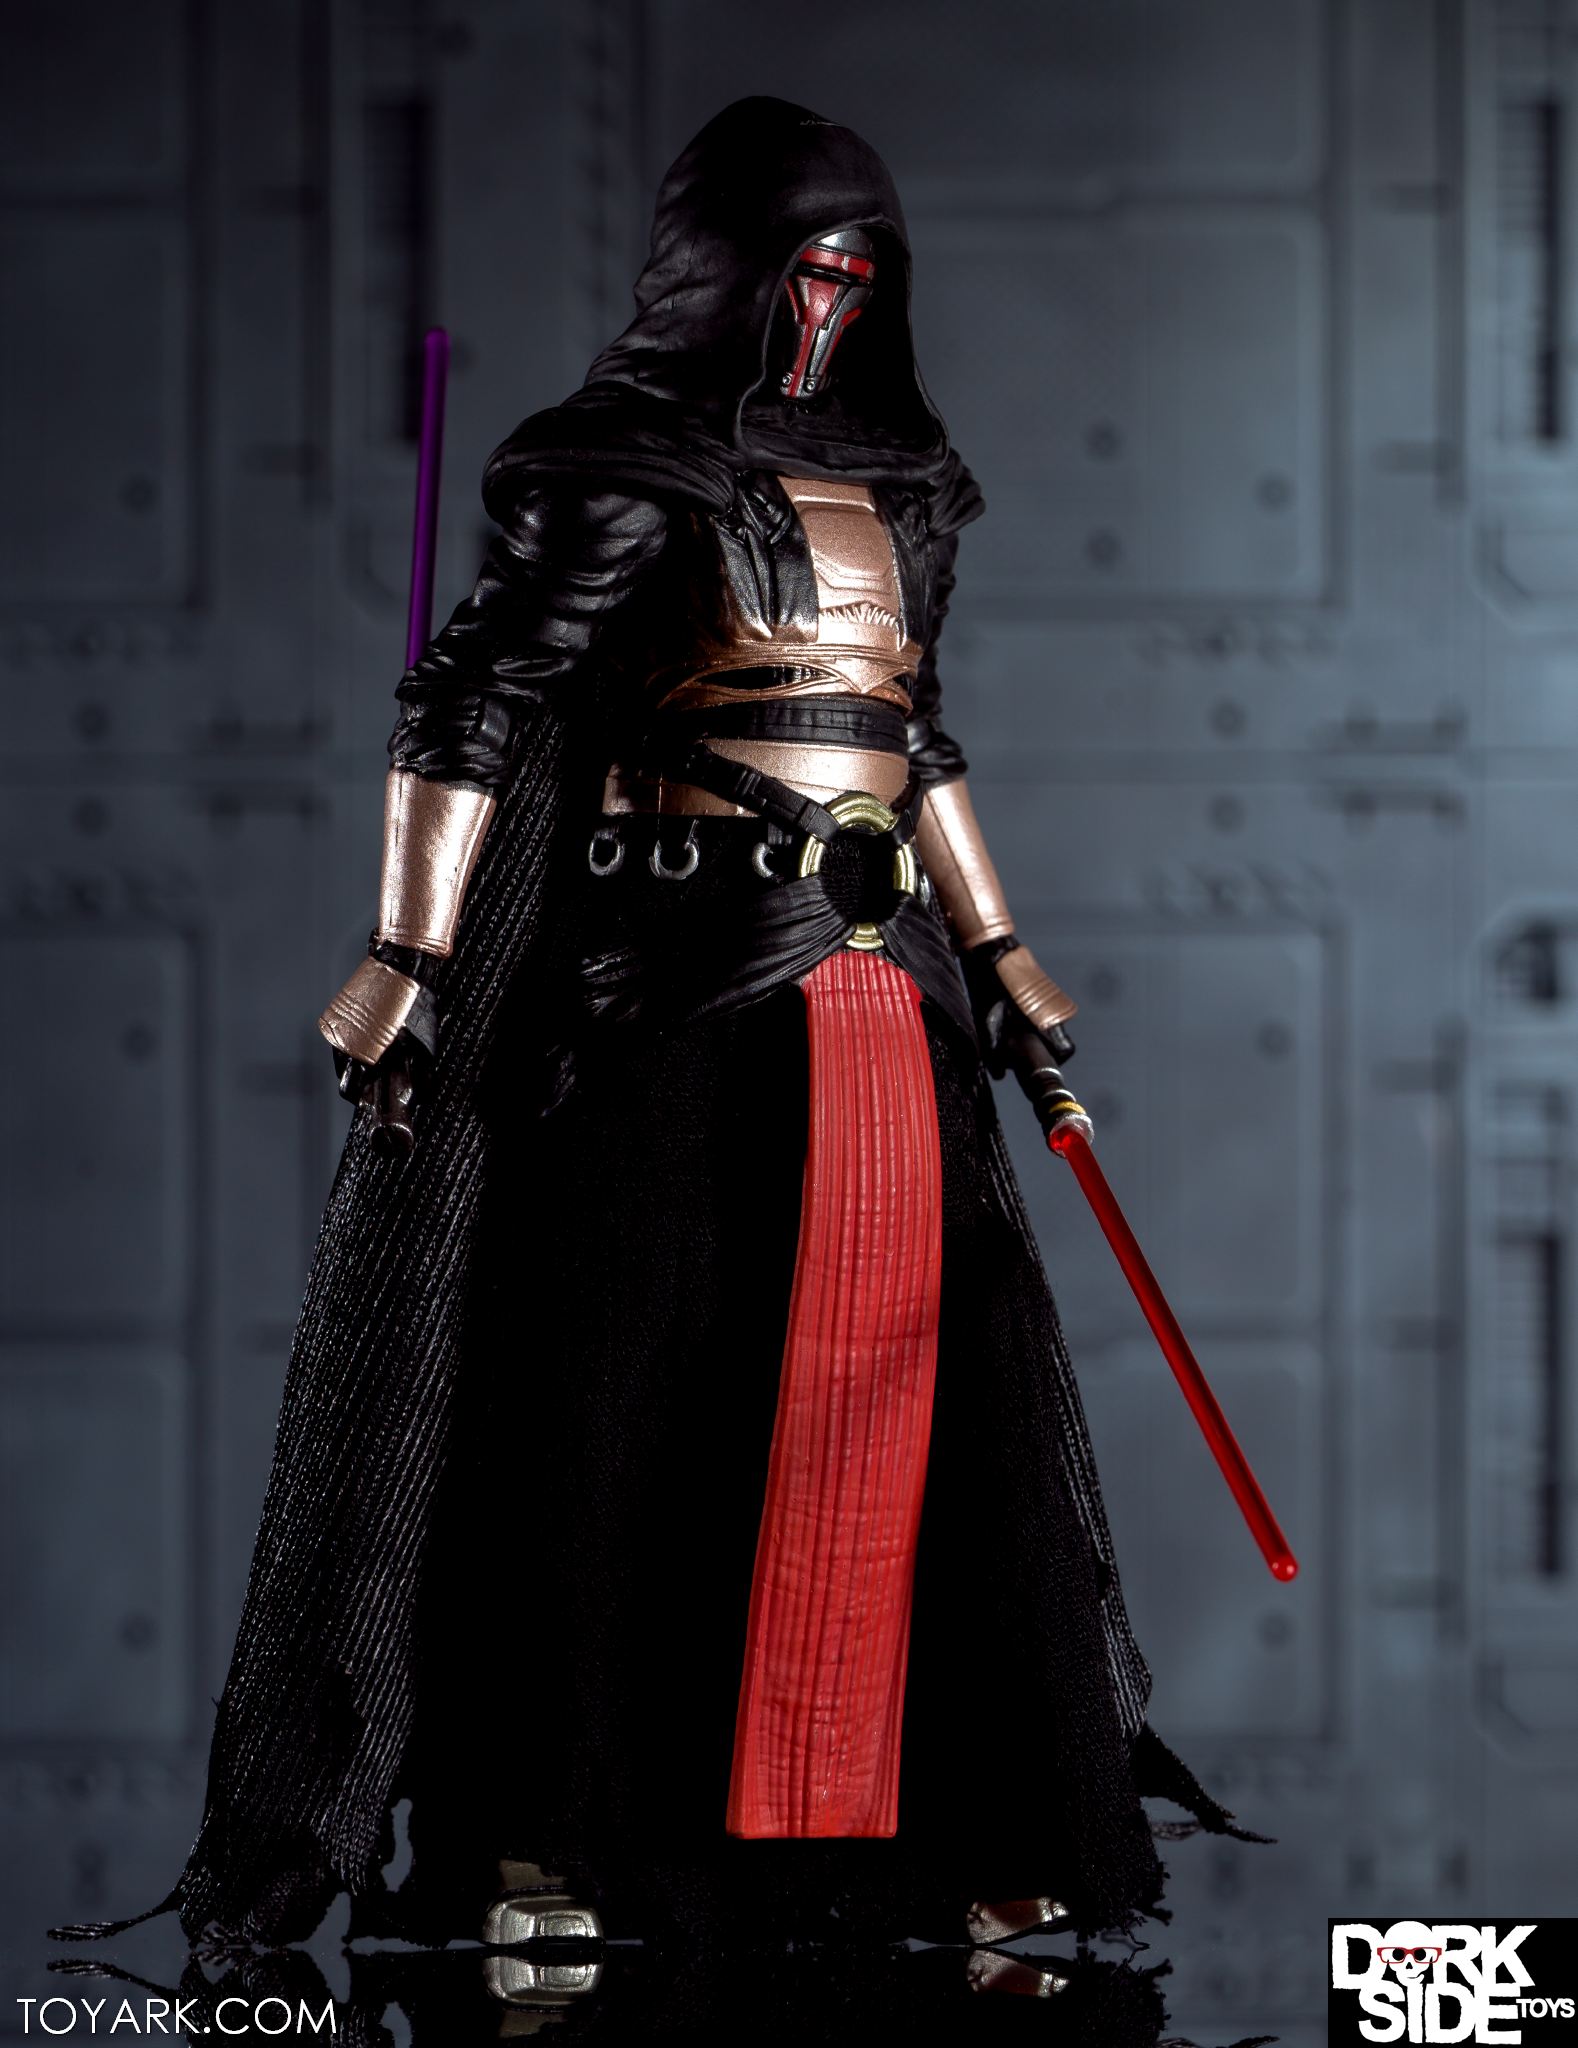 Look At This Official KOTOR Action Figure